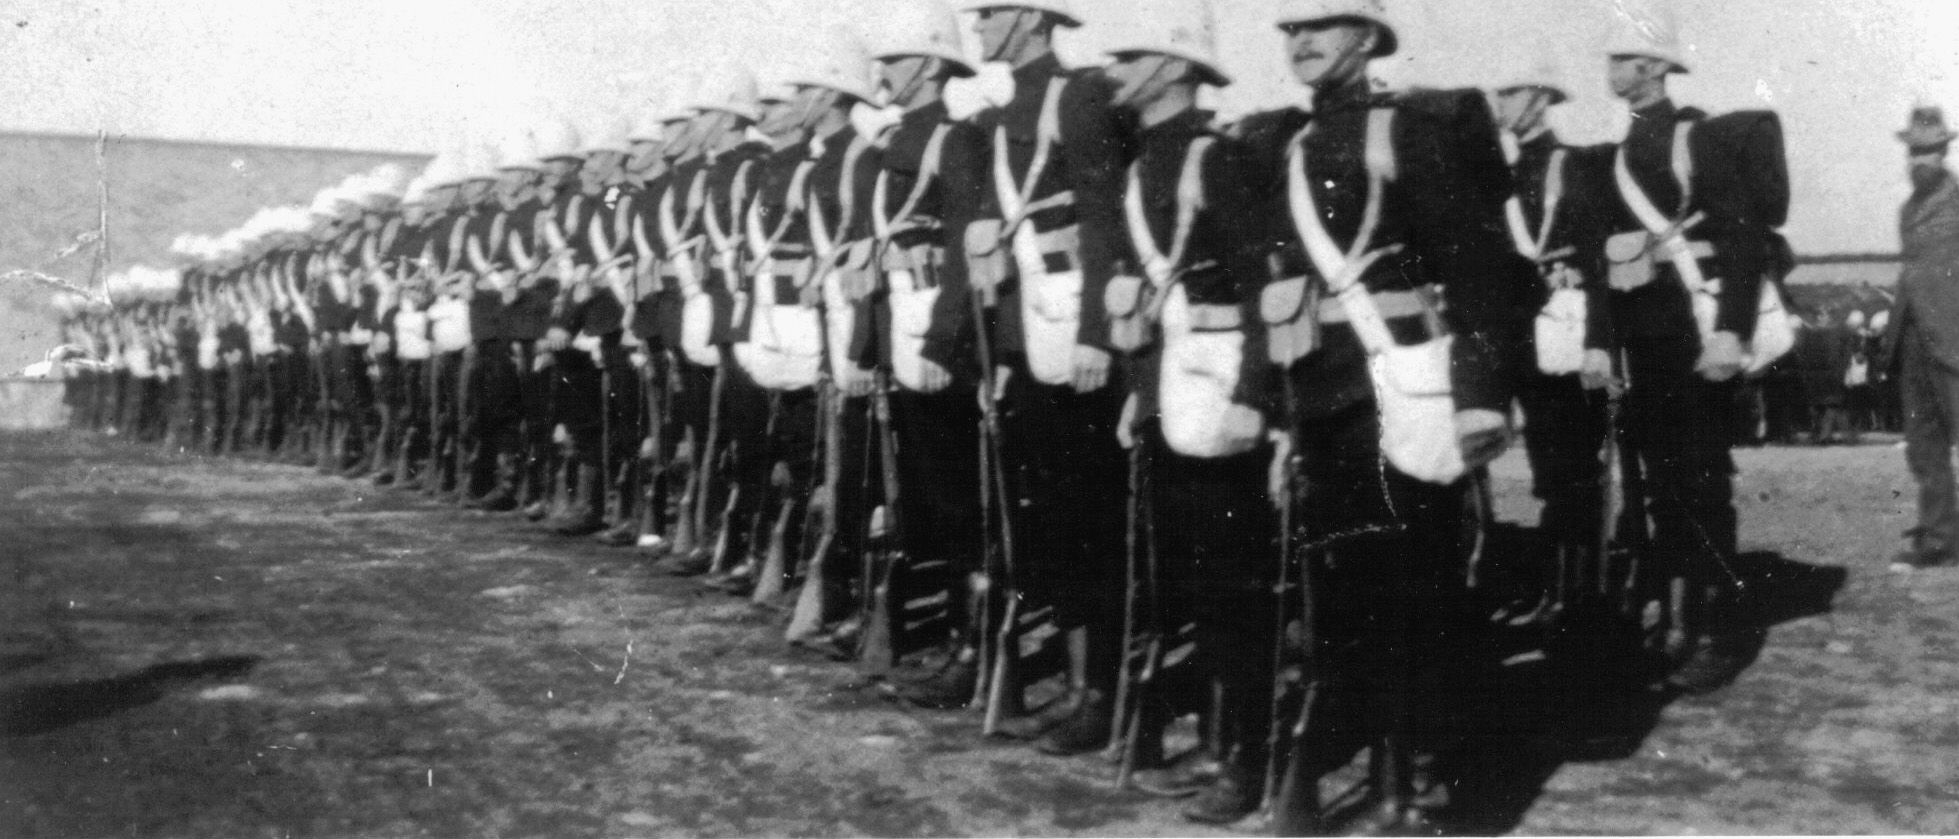 Members of D Company stand at attention on parade.